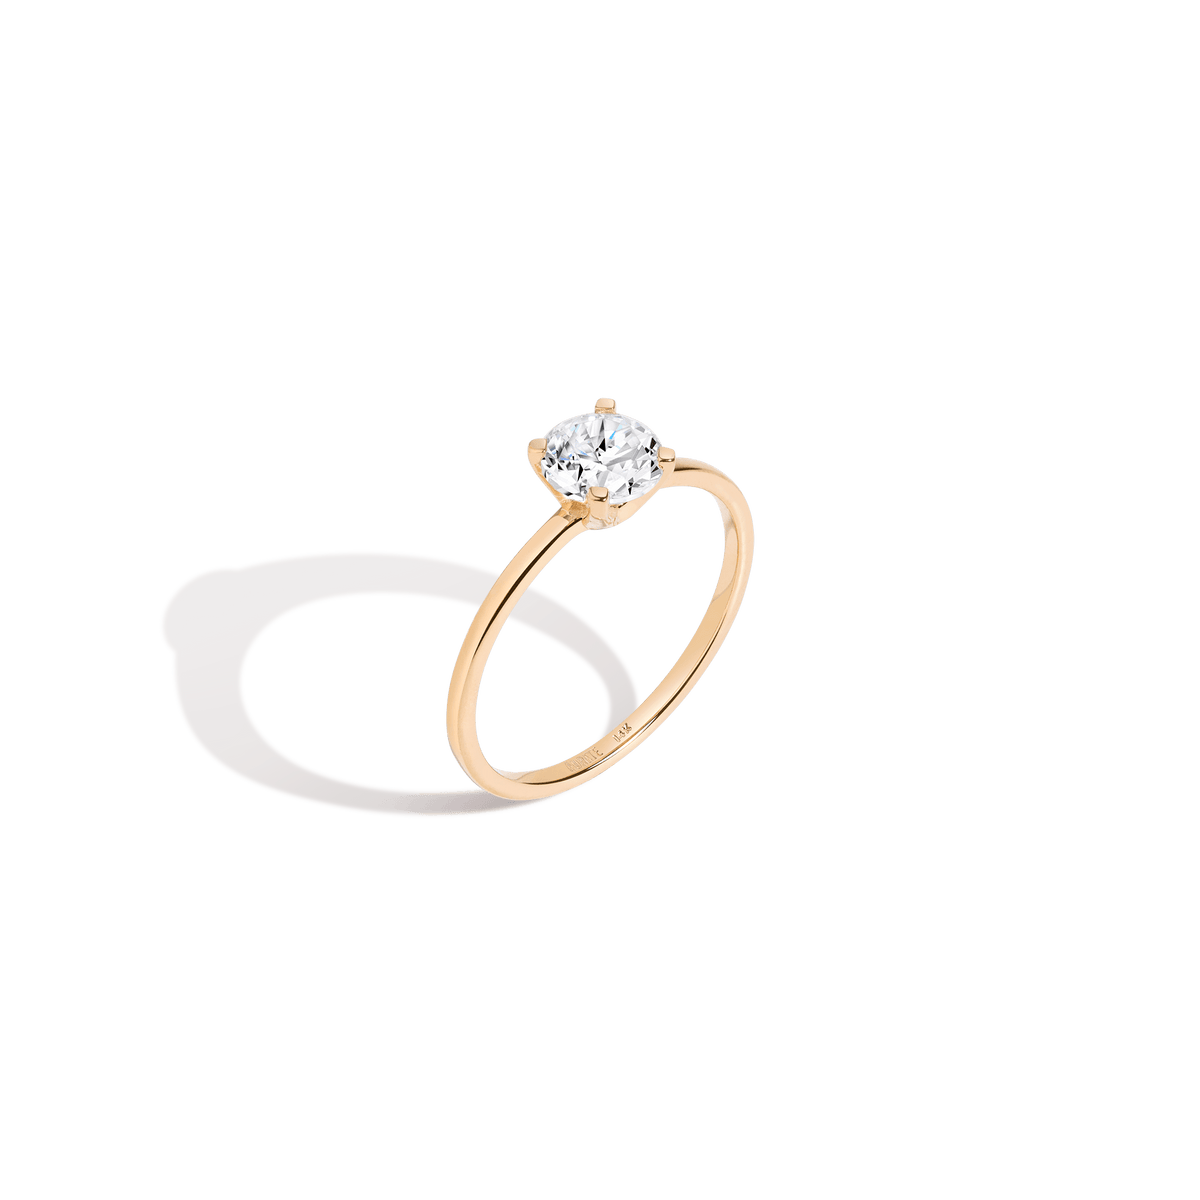 gold diamond rings for women with price